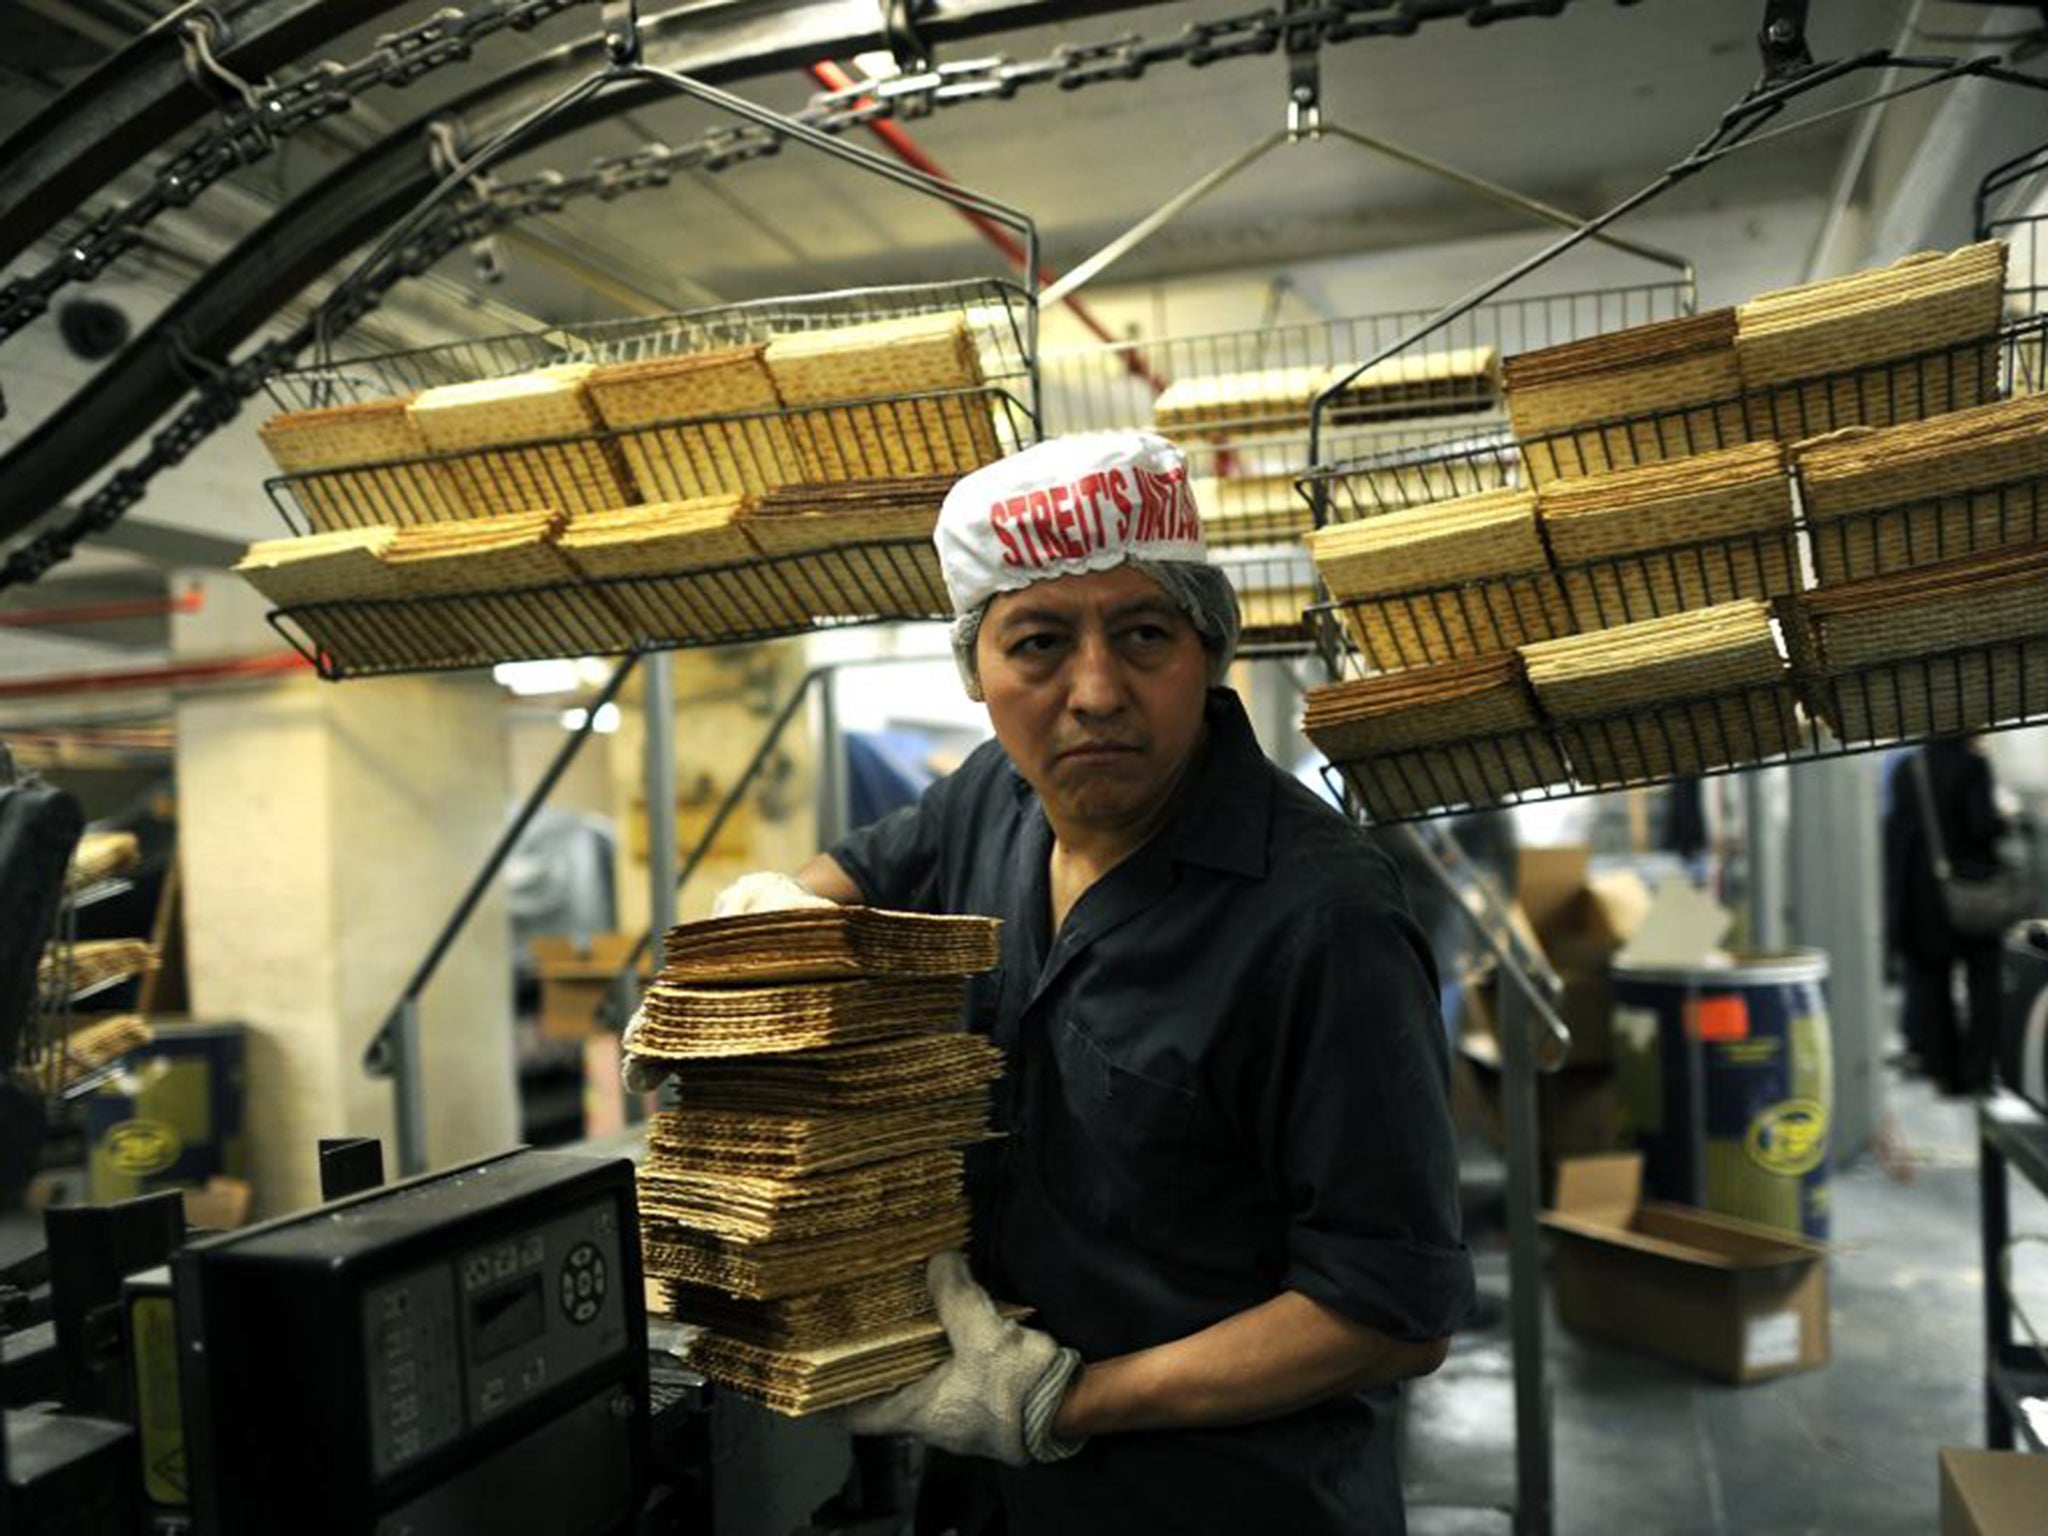 Unleavened matzah being produced in a factory ahead of Passover